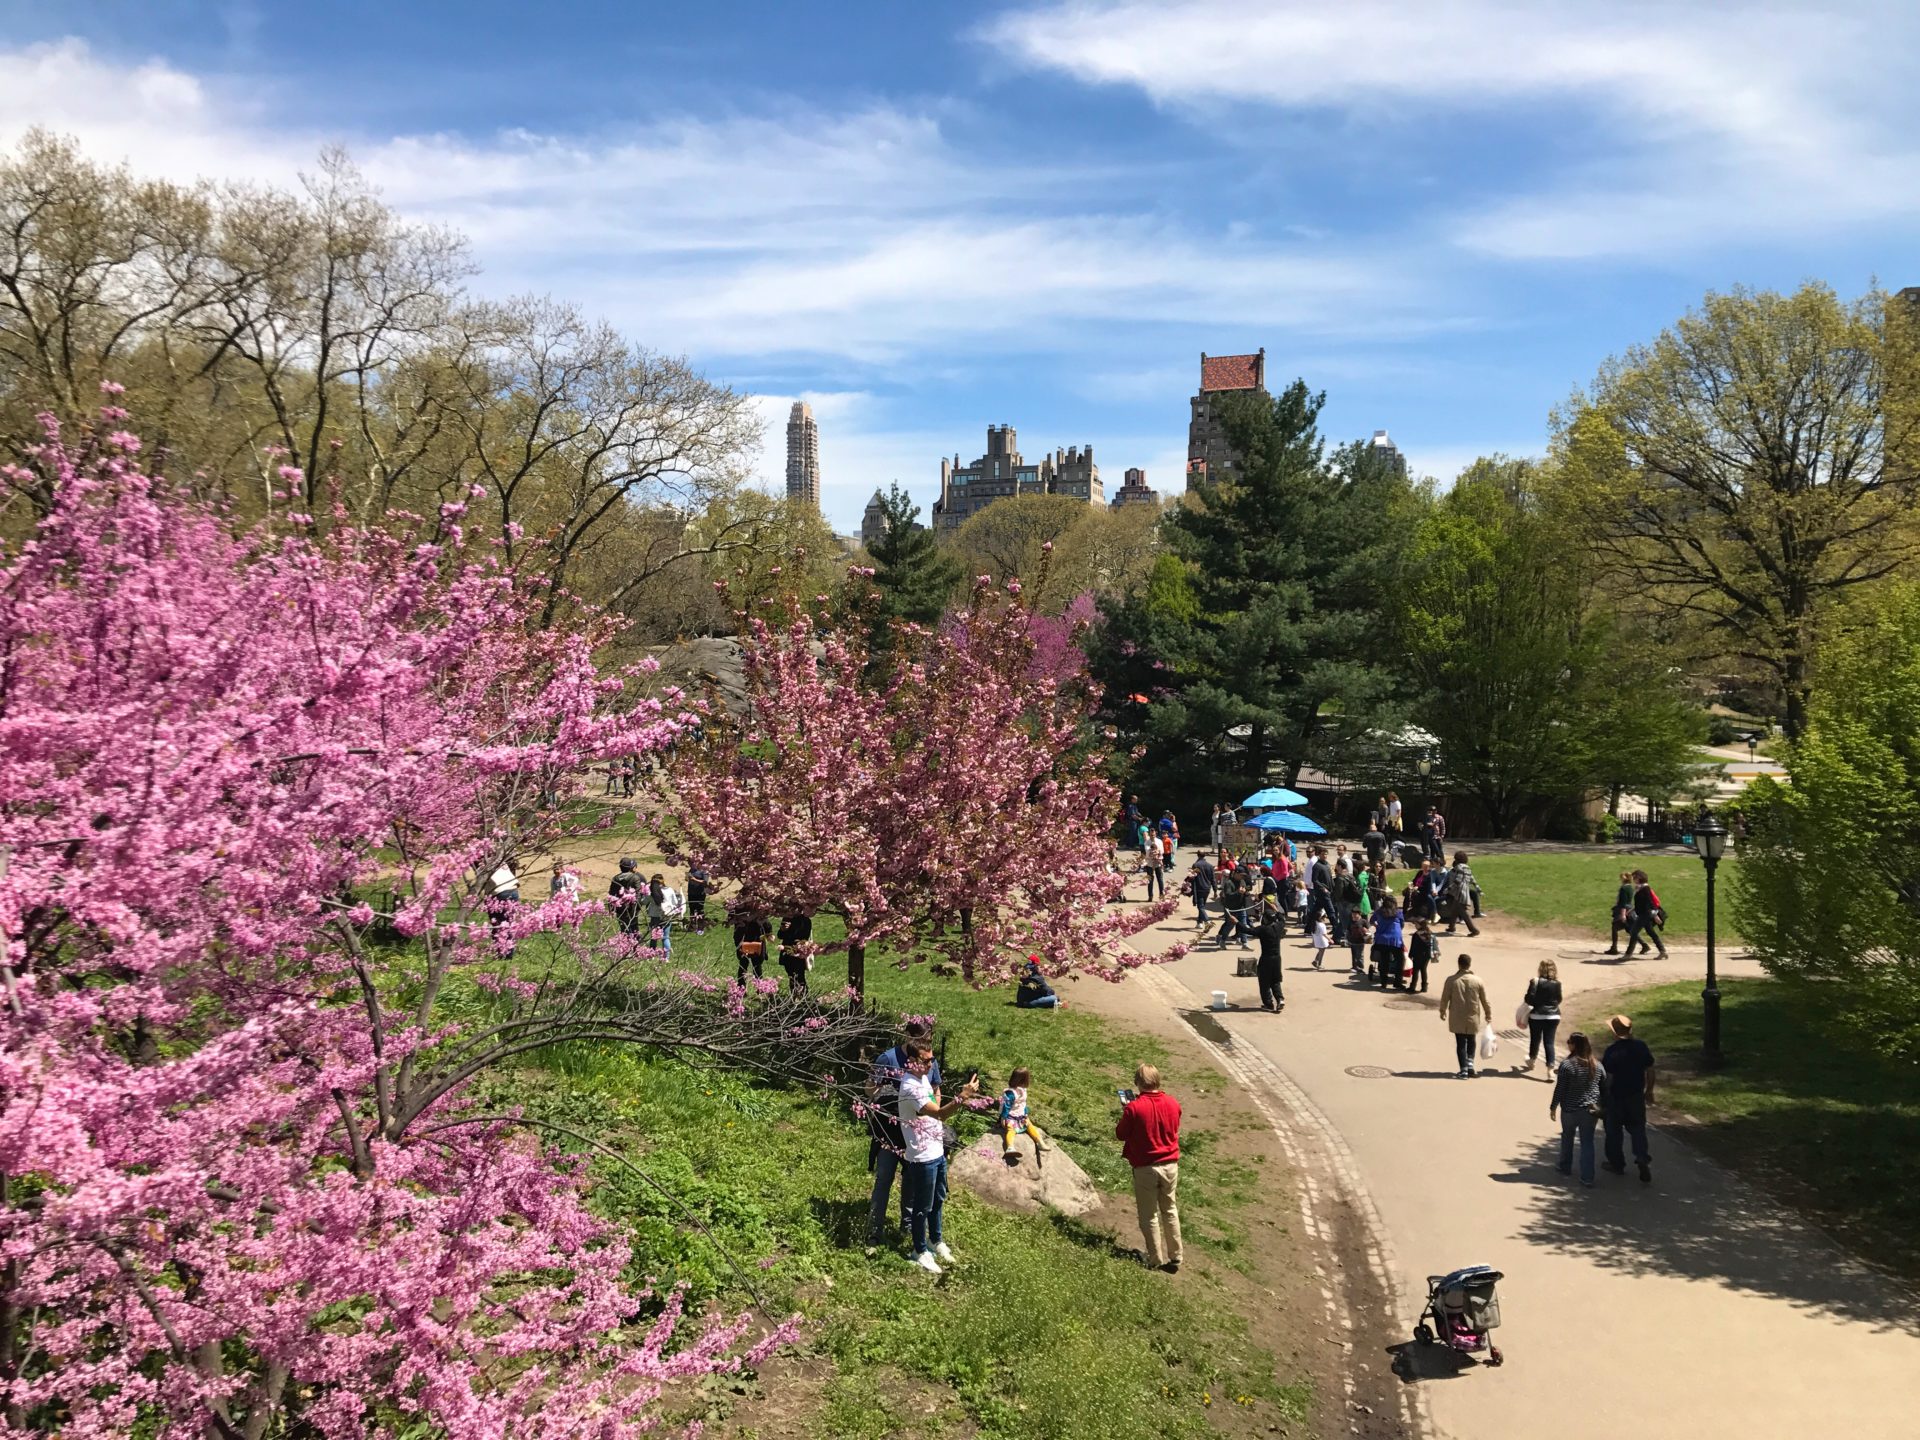 Cherry Blossoms in Central Park